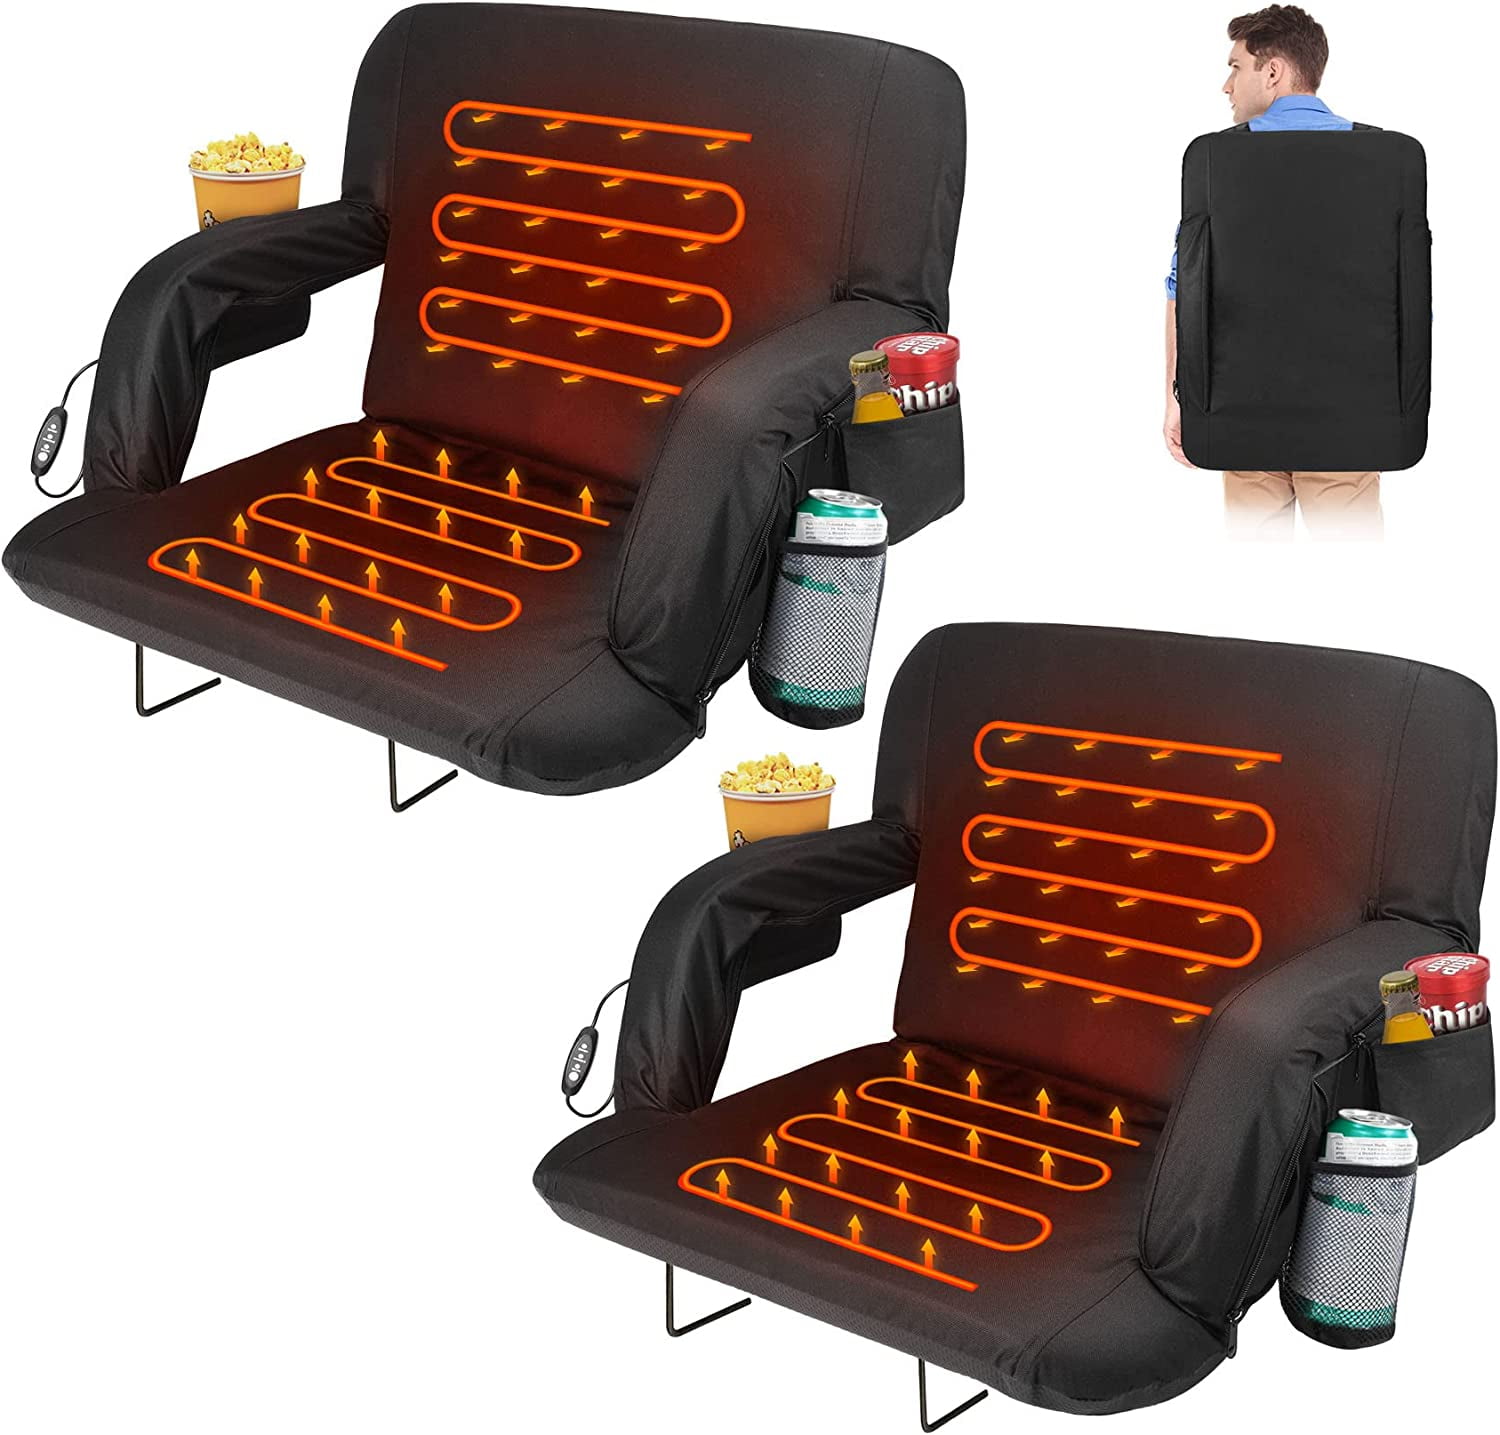 Dropship Stadium Seating For Bleachers, Heated Bleacher Seats With Backrest  Padded Cushion And Armrest For Adults And Child Portable Folding Extra Wide Football  Stadium Chairs With Back Support to Sell Online at